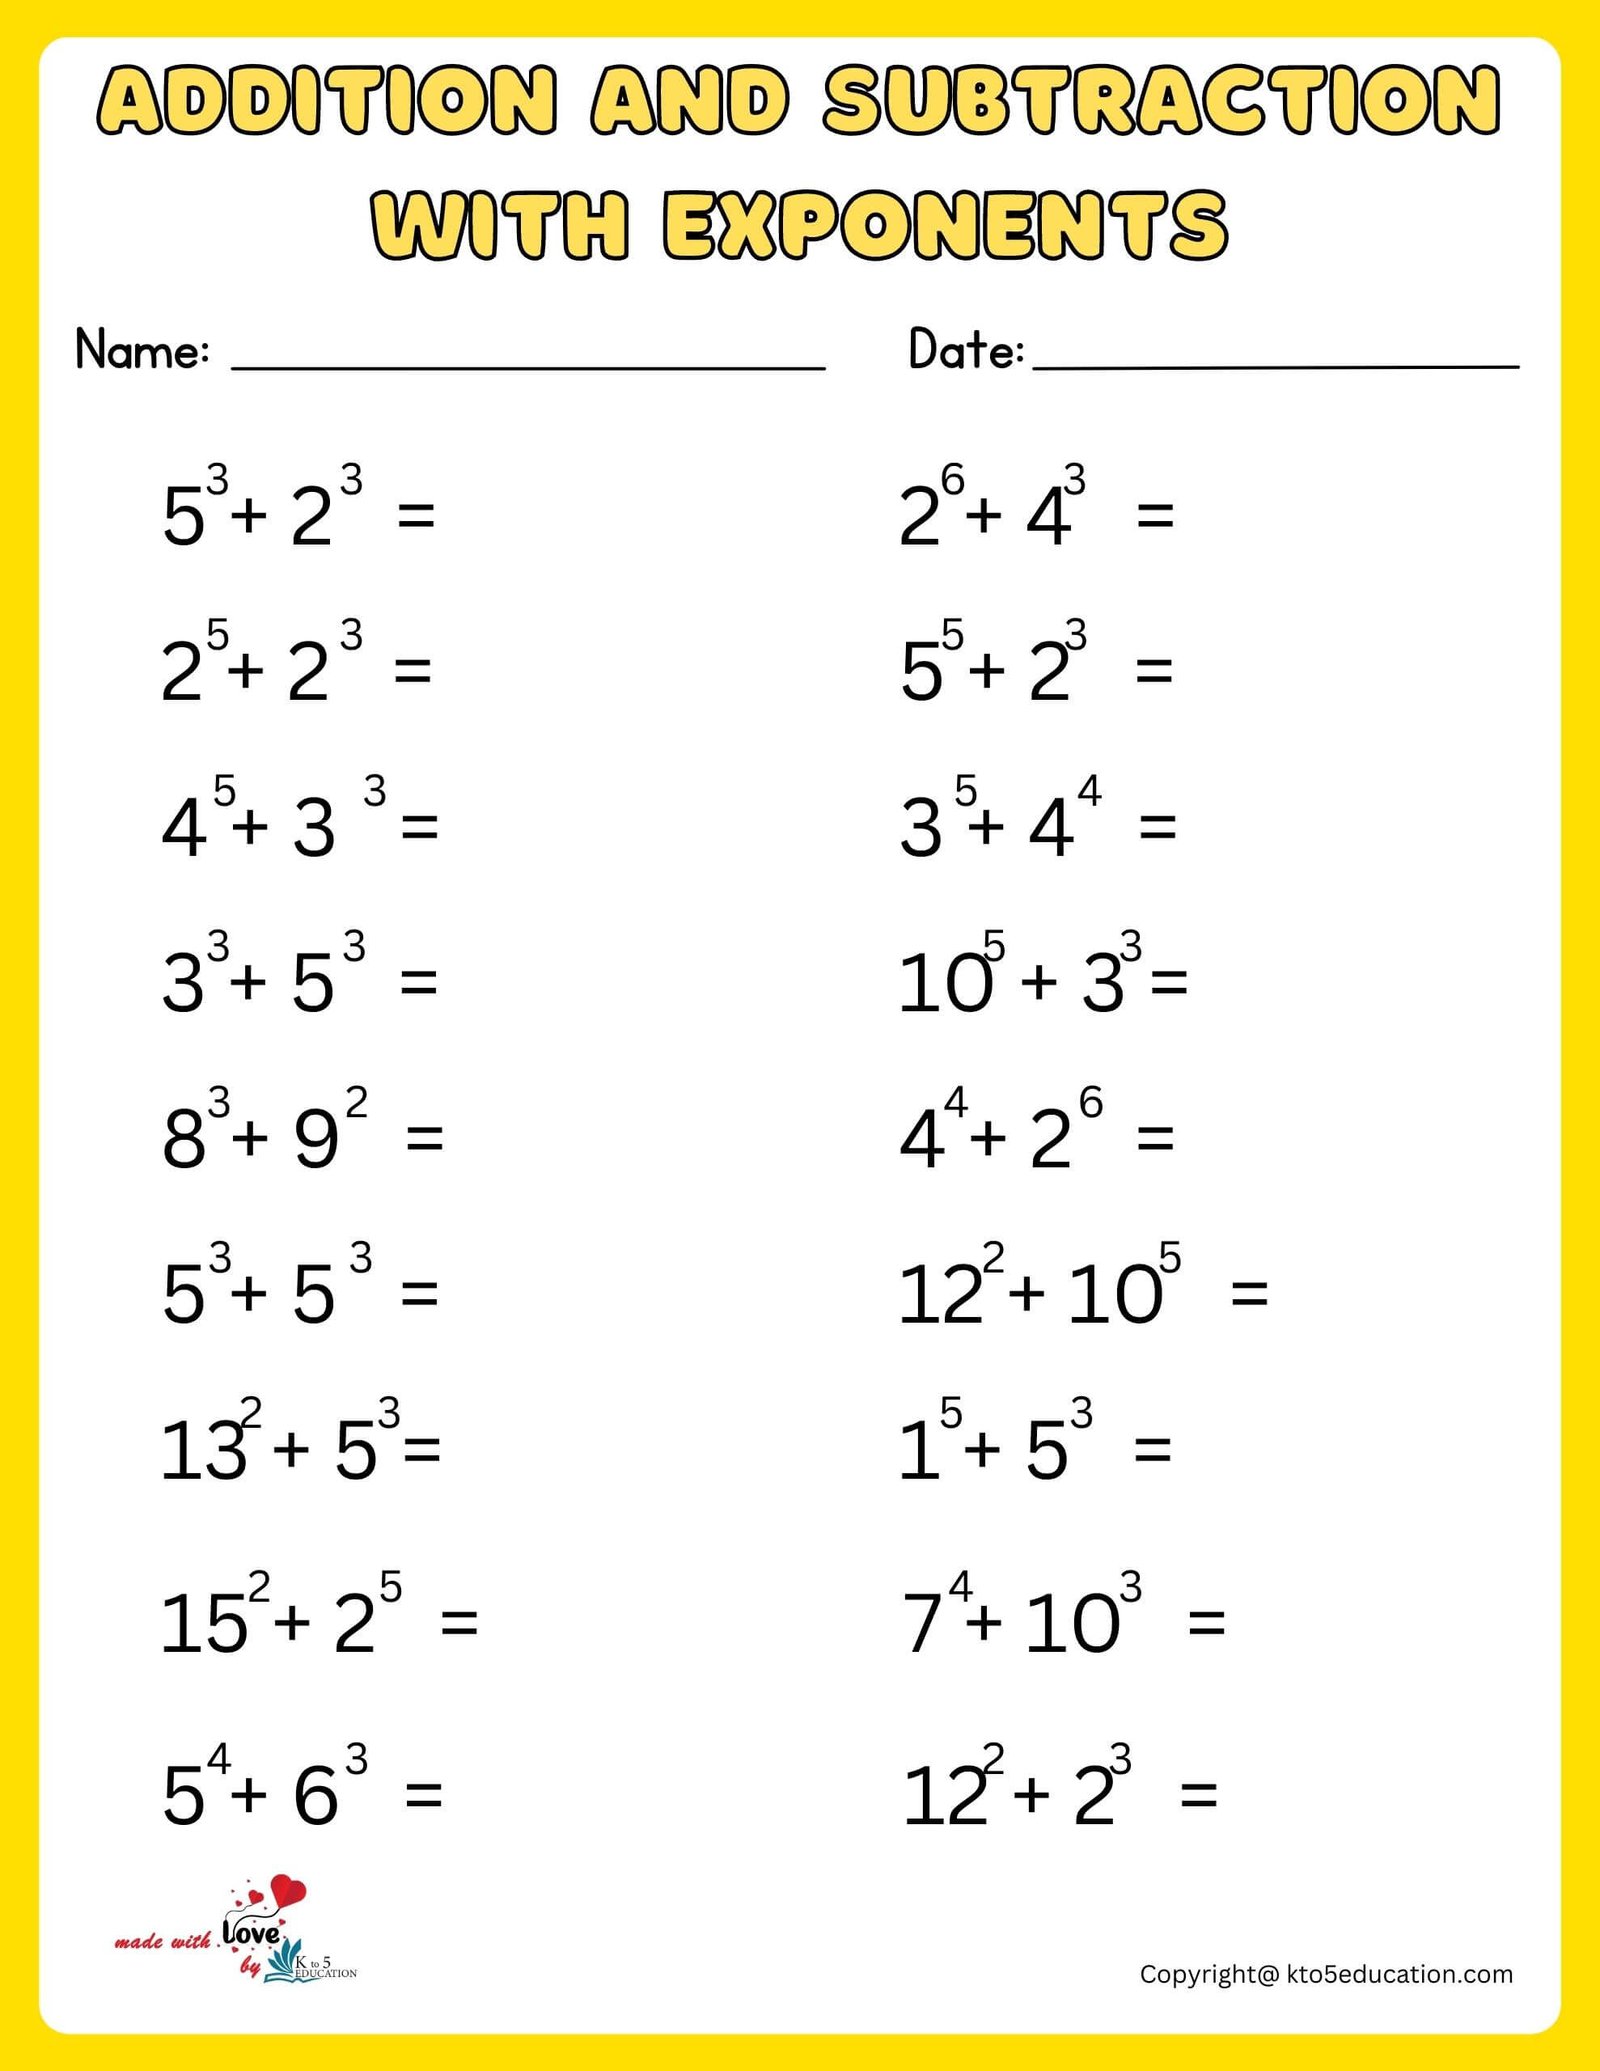 Multi-Exponents Worksheet With Additions And Subtractions